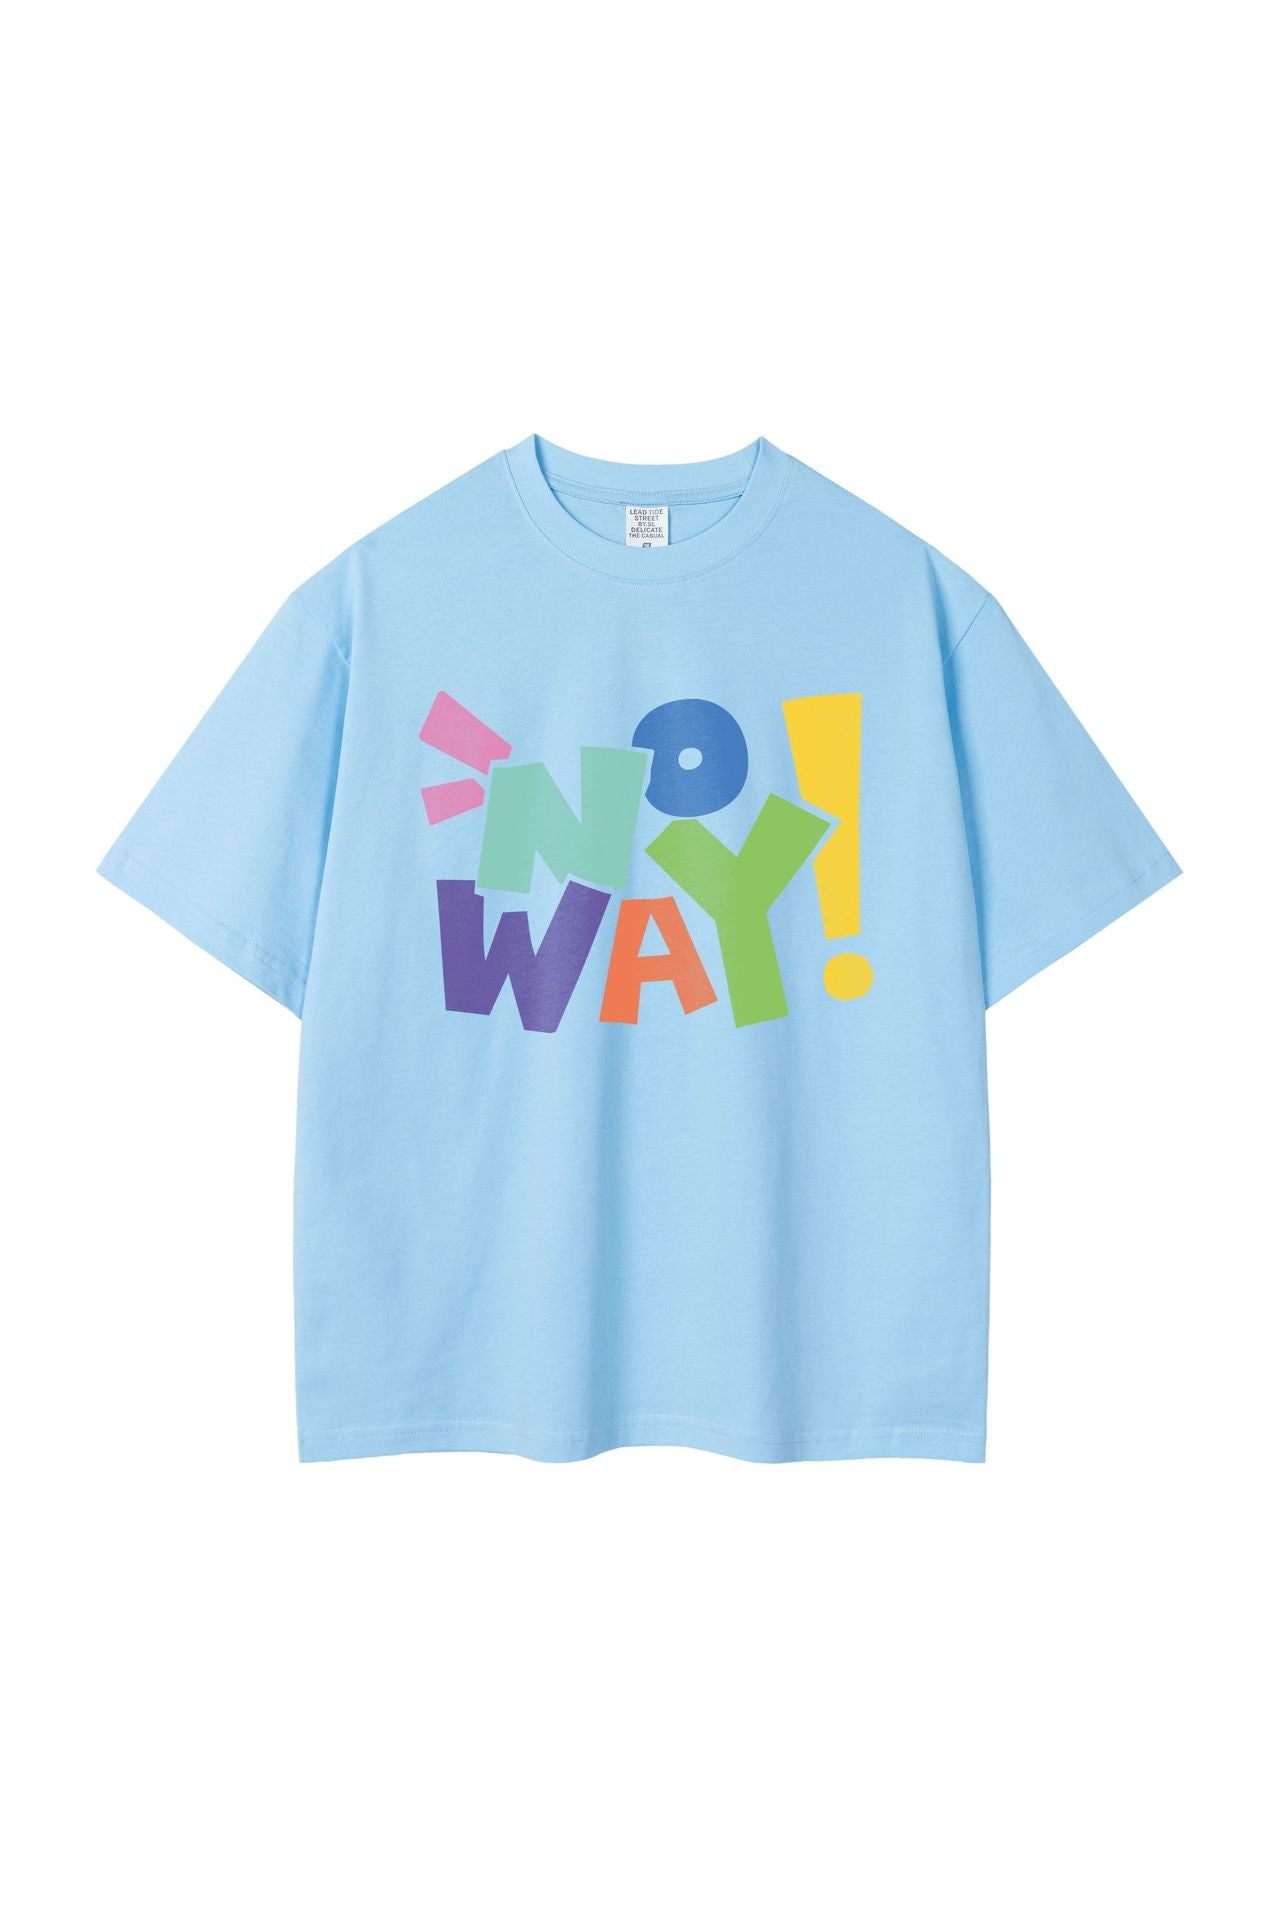 Letter NOWAY Summer Pure Cotton Fashion Casual T-shirt